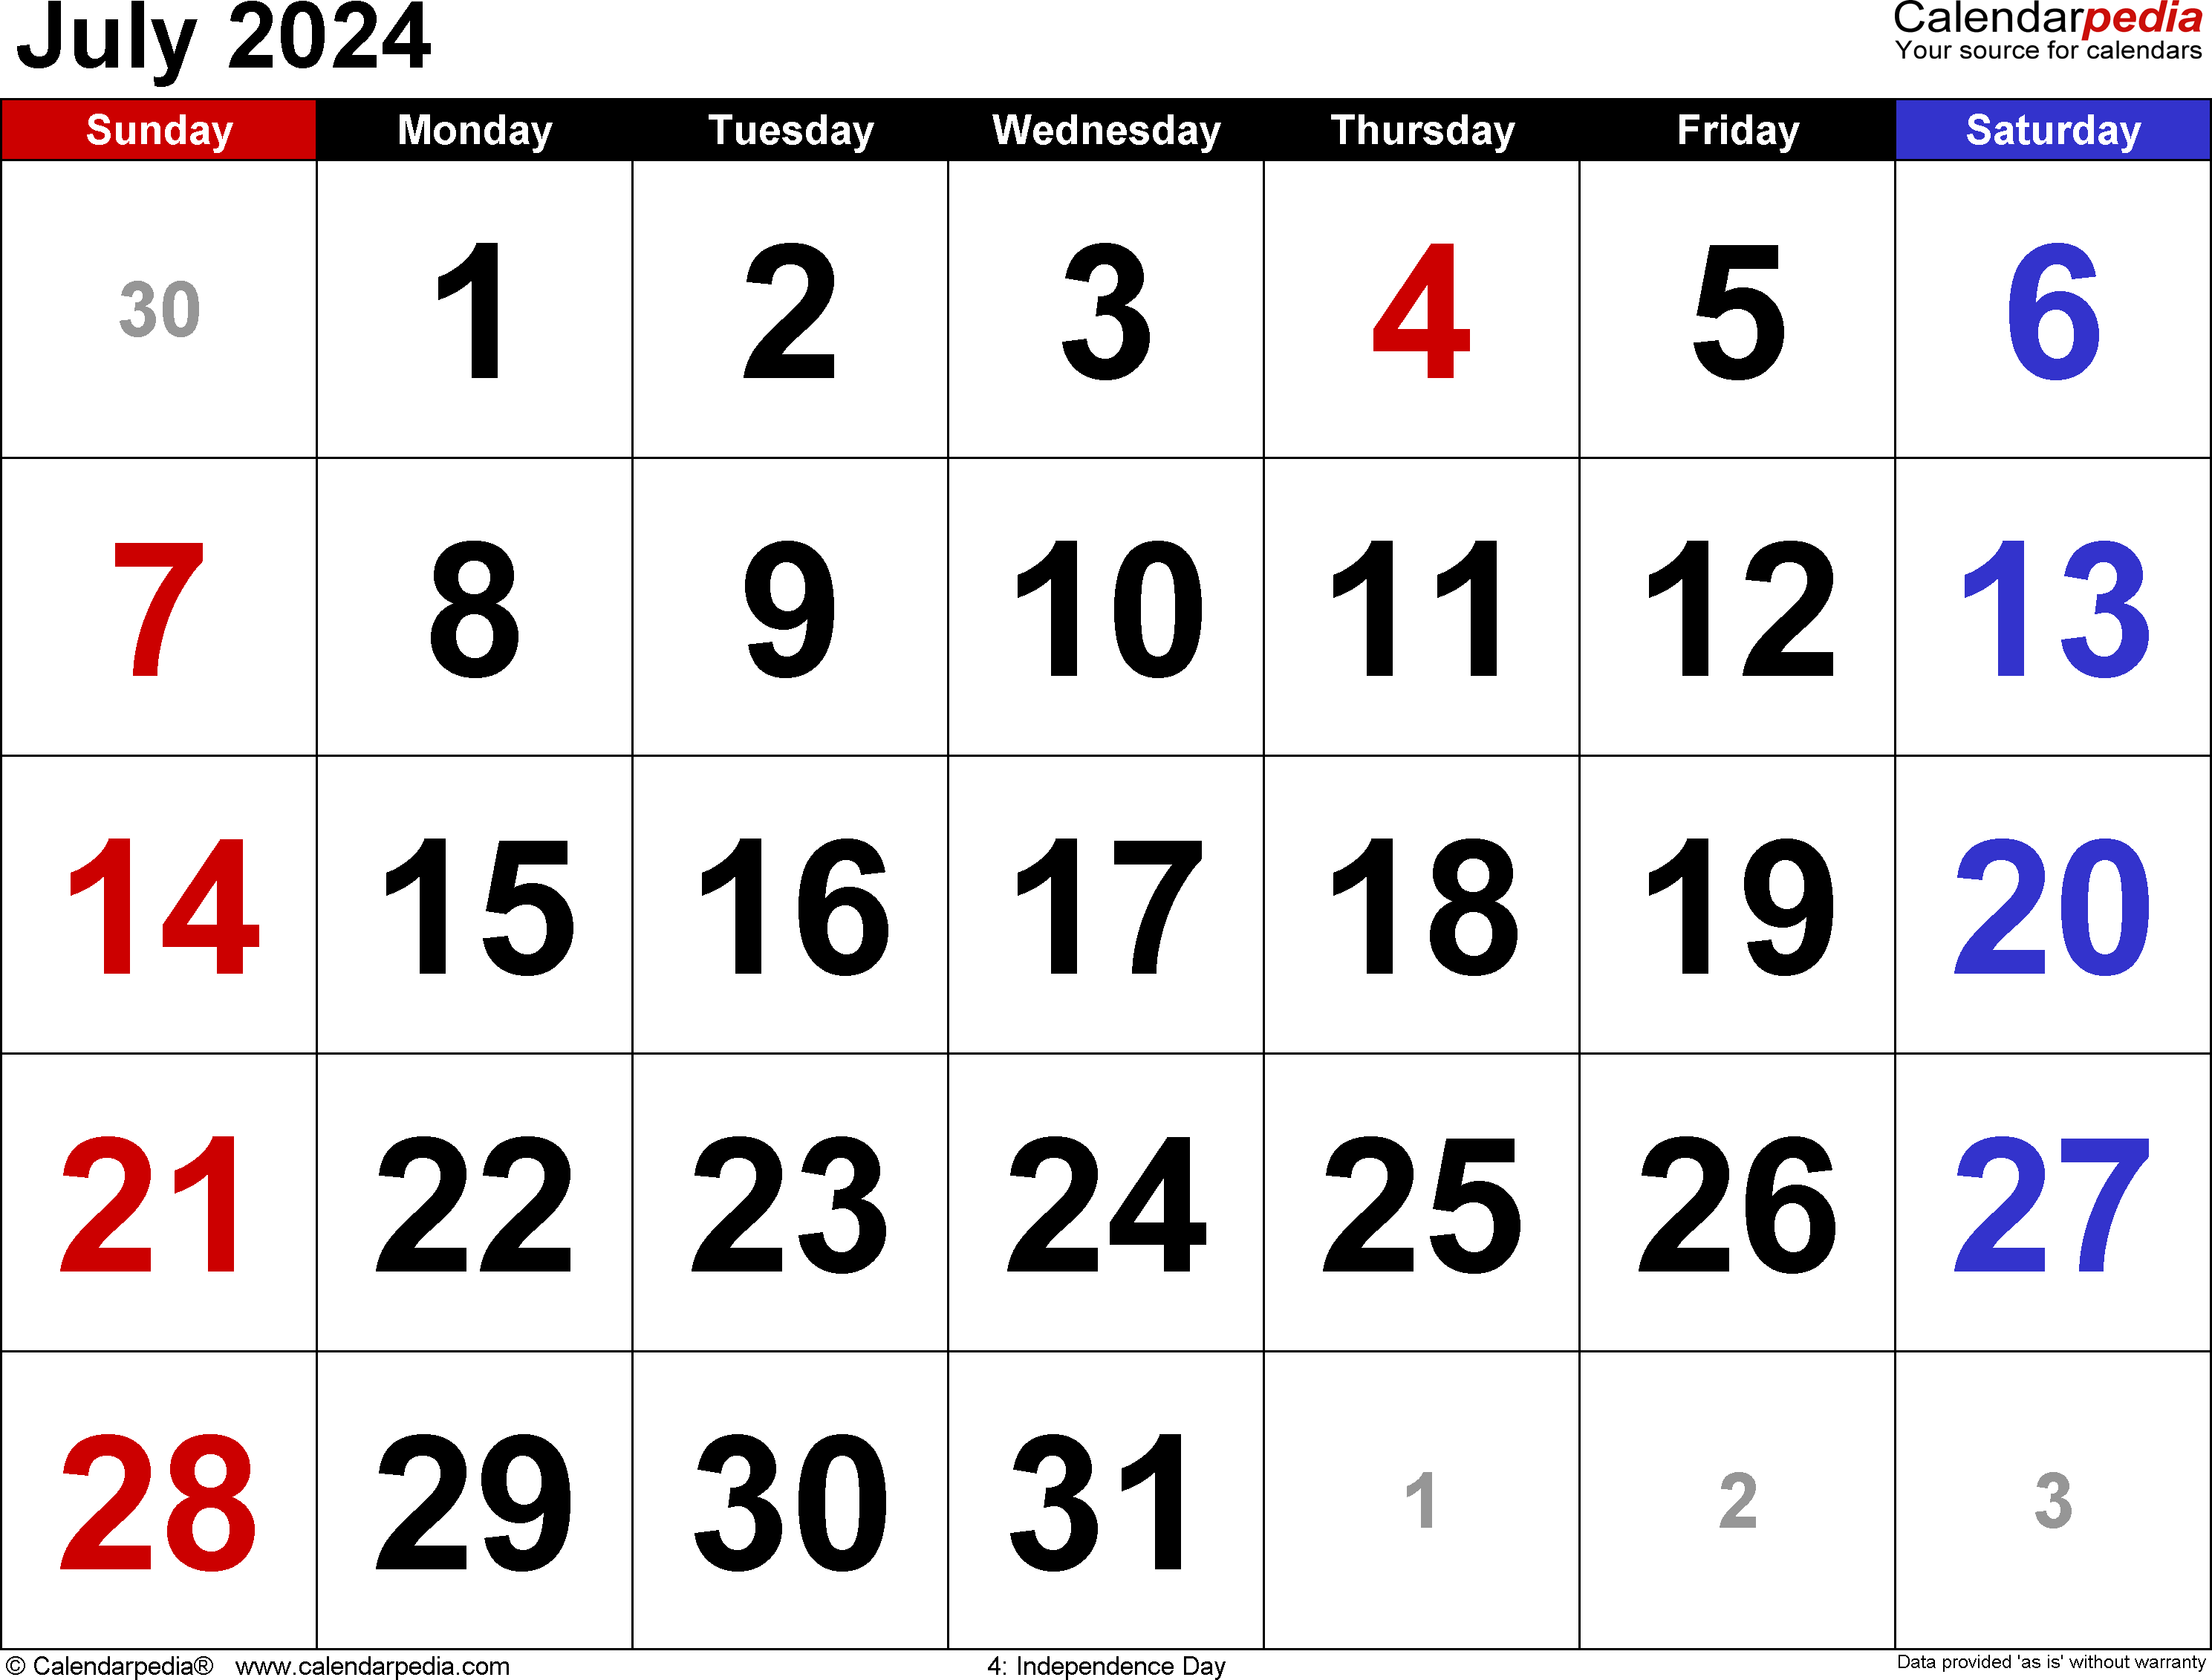 July 2024 Calendar | Templates For Word, Excel And Pdf with regard to July 2024 Calendar Word